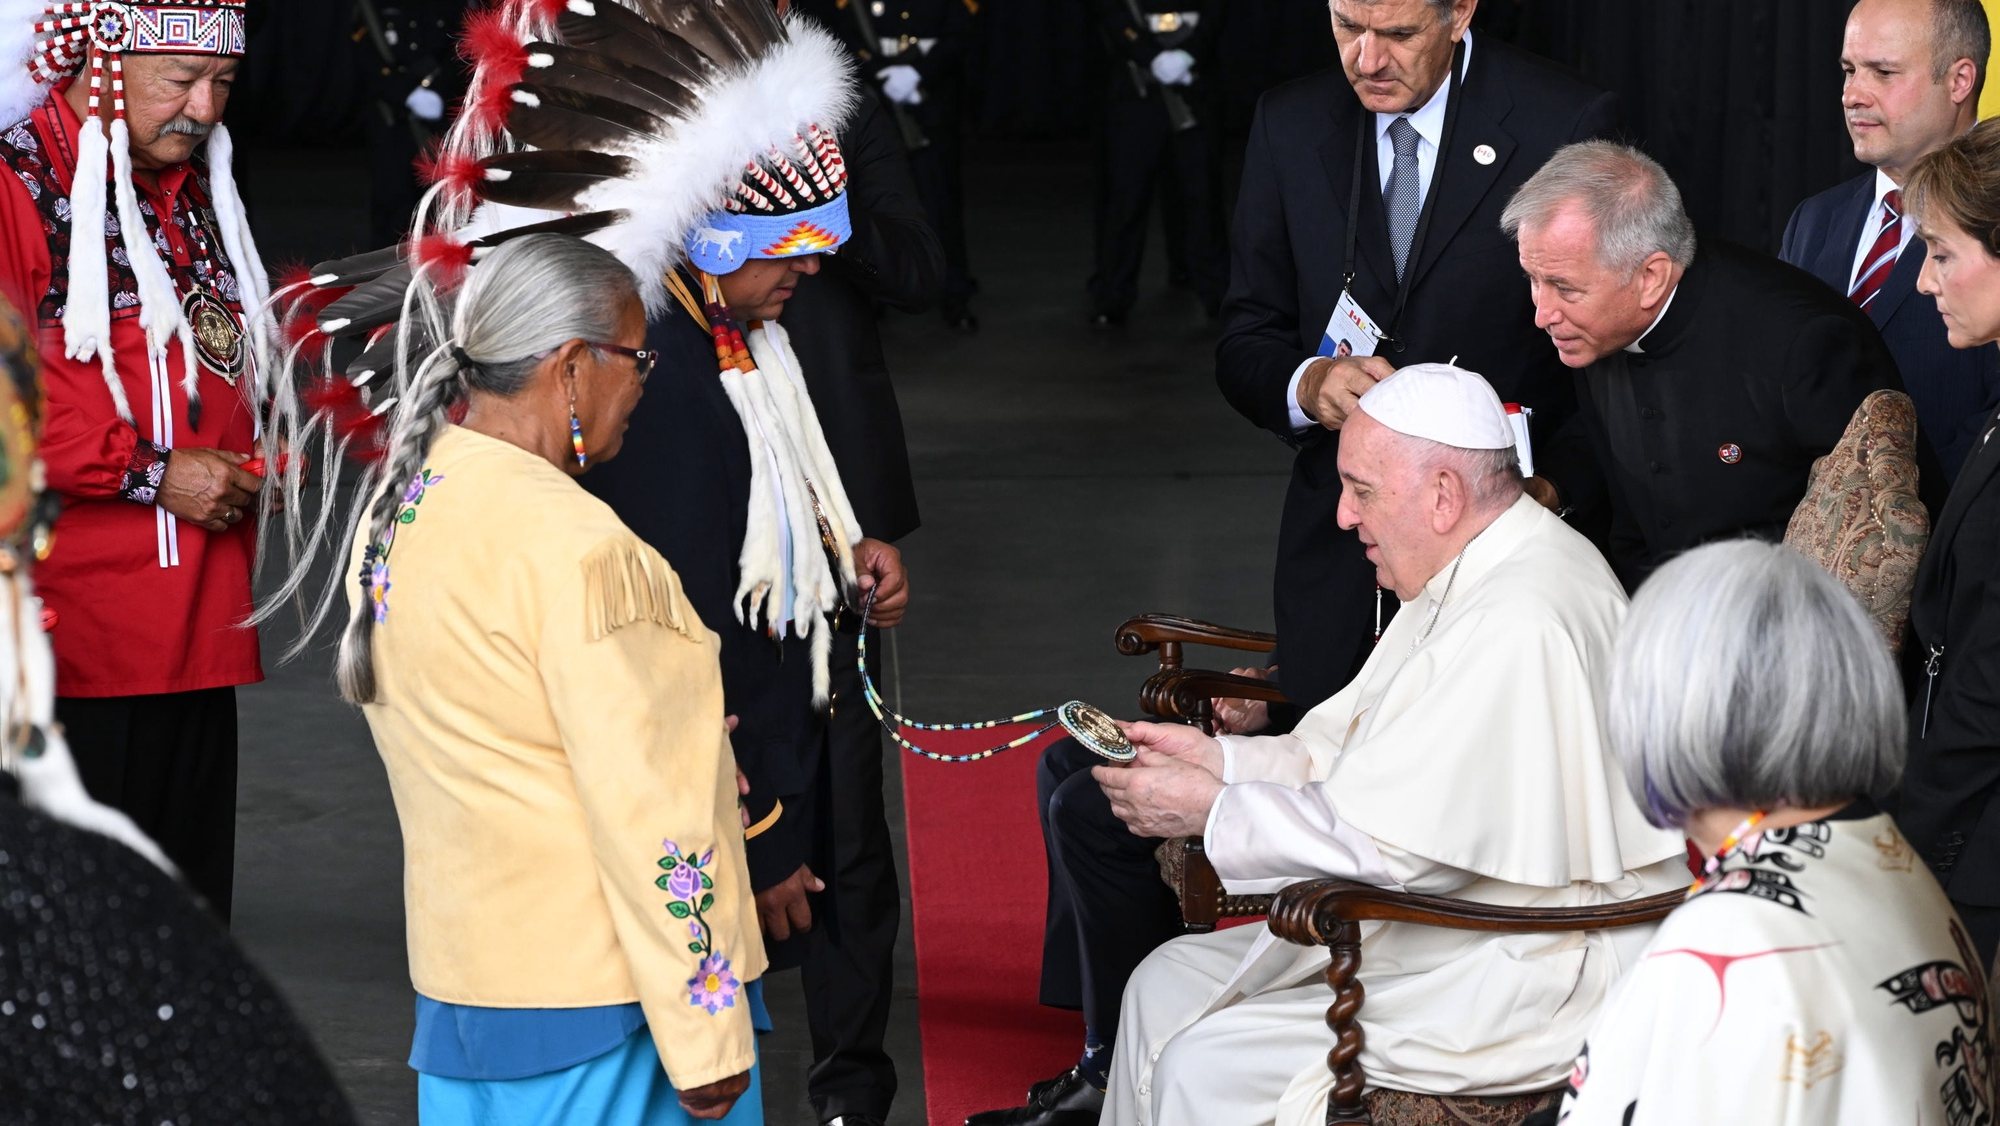 epa10090032 Pope Francis meets members of an indigenous tribe during his welcoming ceremony at Edmonton International Airport in Alberta, western Canada,24 July 2022. The five-days visit is the first papal visit to Canada in 20 years.  EPA/CIRO FUSCO